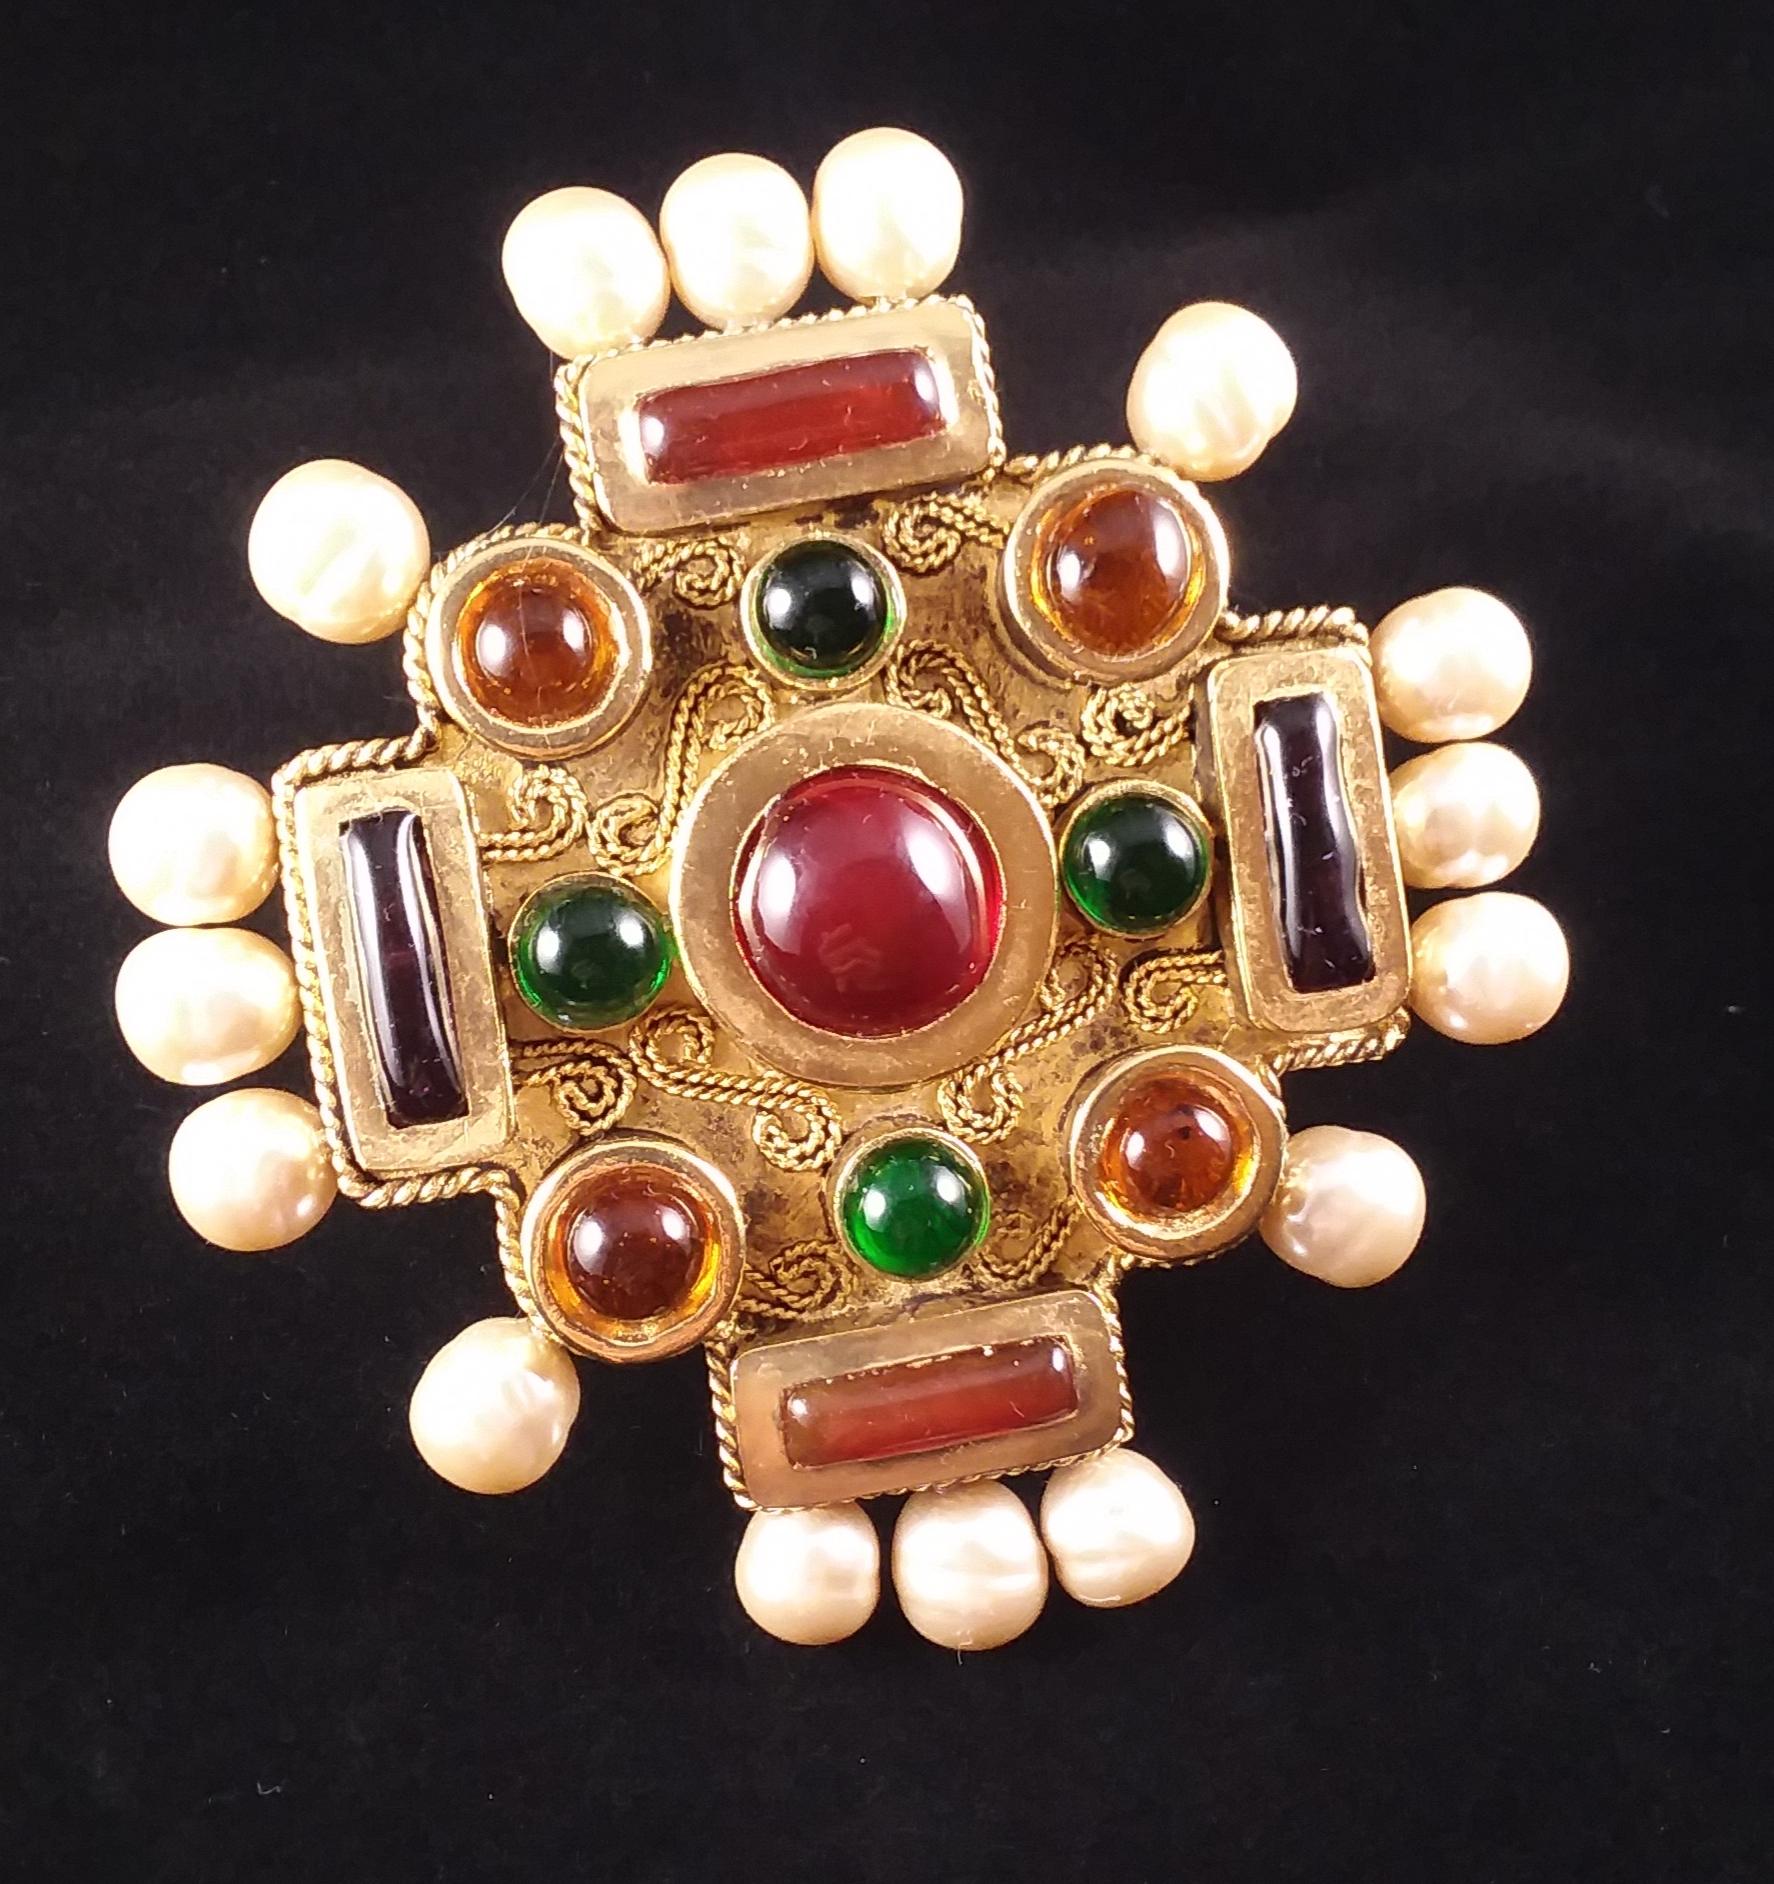 Rare, enormous Maison Gripoix for Chanel Byzantine Cruciform cuff bracelet. The symmetrical squared oversized cruciform cuff is composed of ruby, emerald, amythest and citrine poured glass pate de verre enamel cabochons which decorate the central